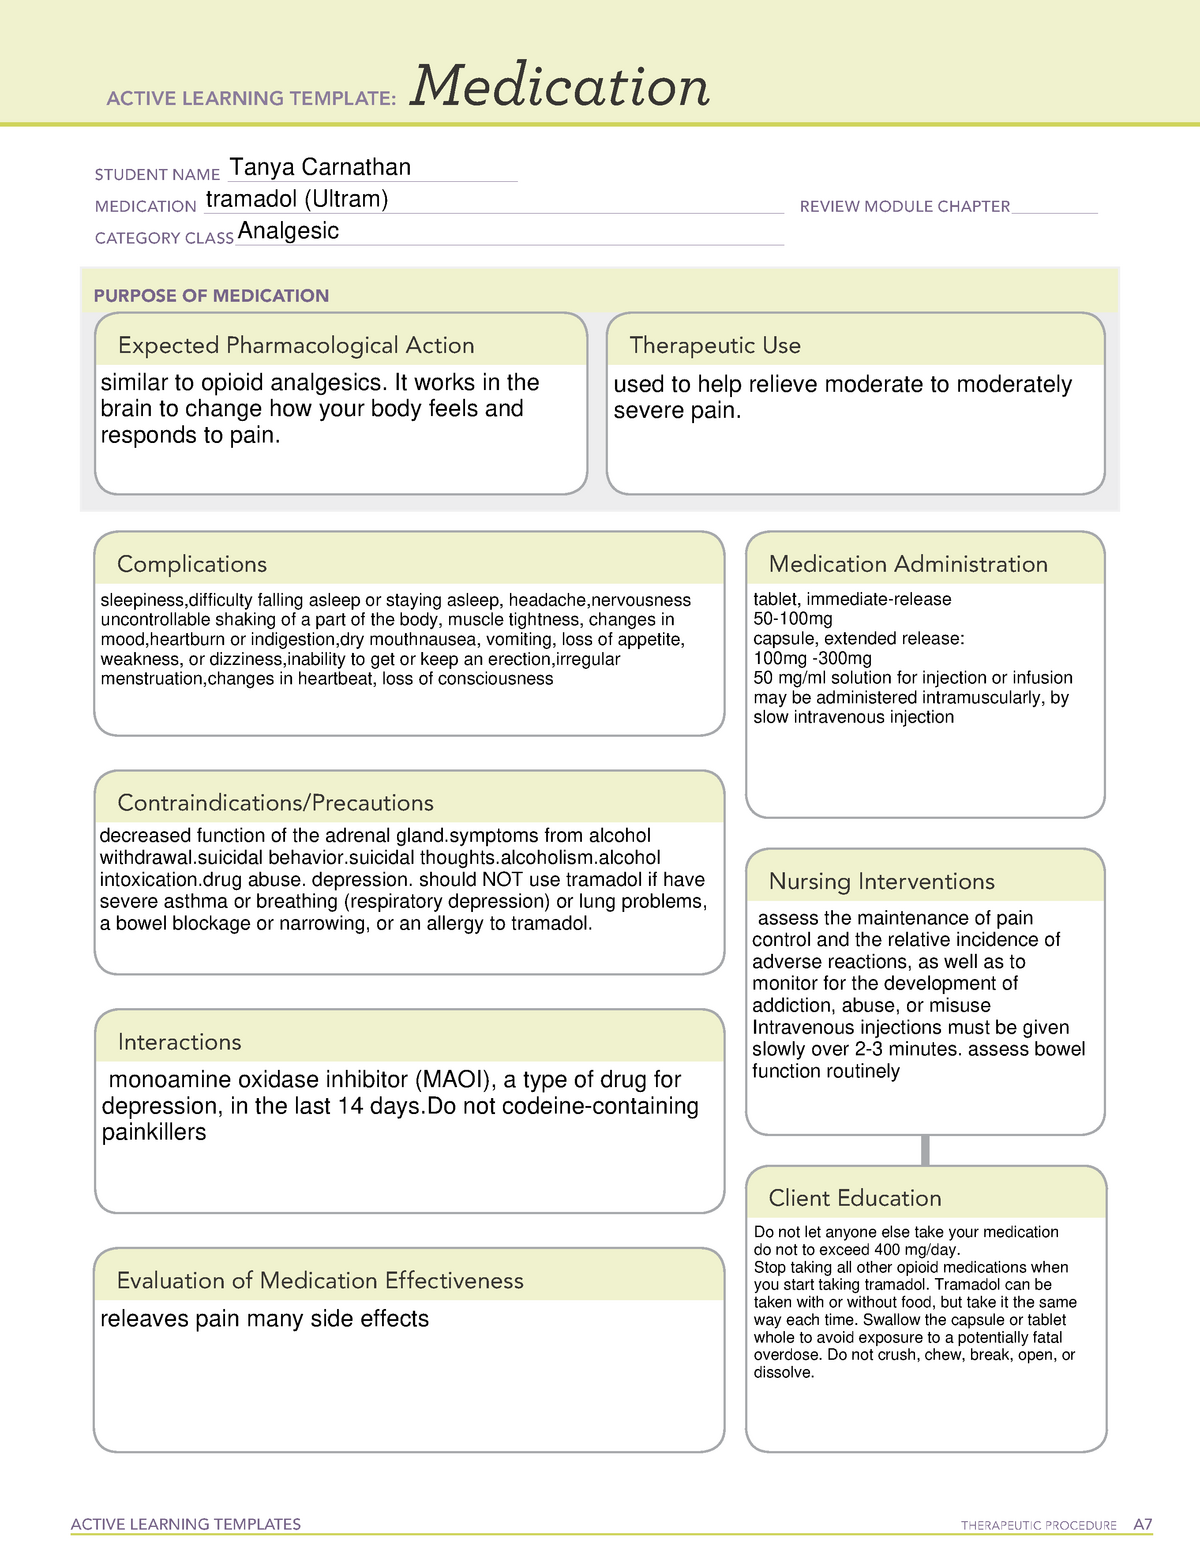 tramadol-medication-card-templete-active-learning-templates